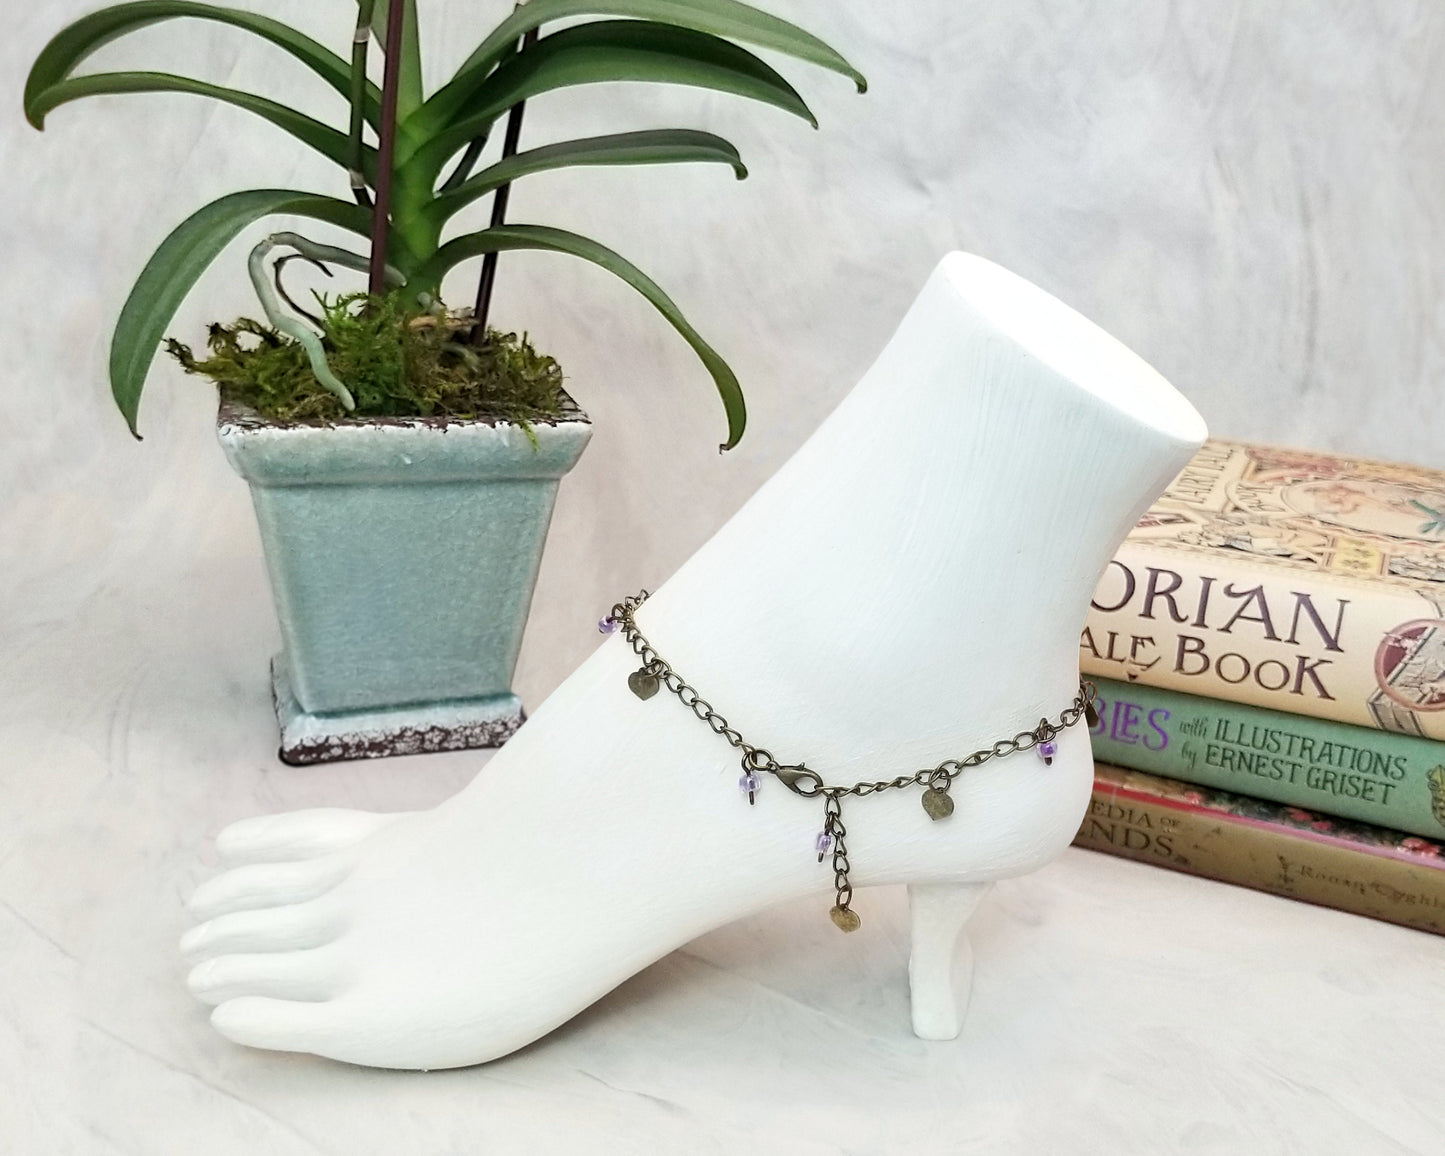 Chain Anklet or Bracelet in Purple, Adjustable, Beach, Boho, Bohemian, Gypsy, Steampunk, Choice of Colors and Metals